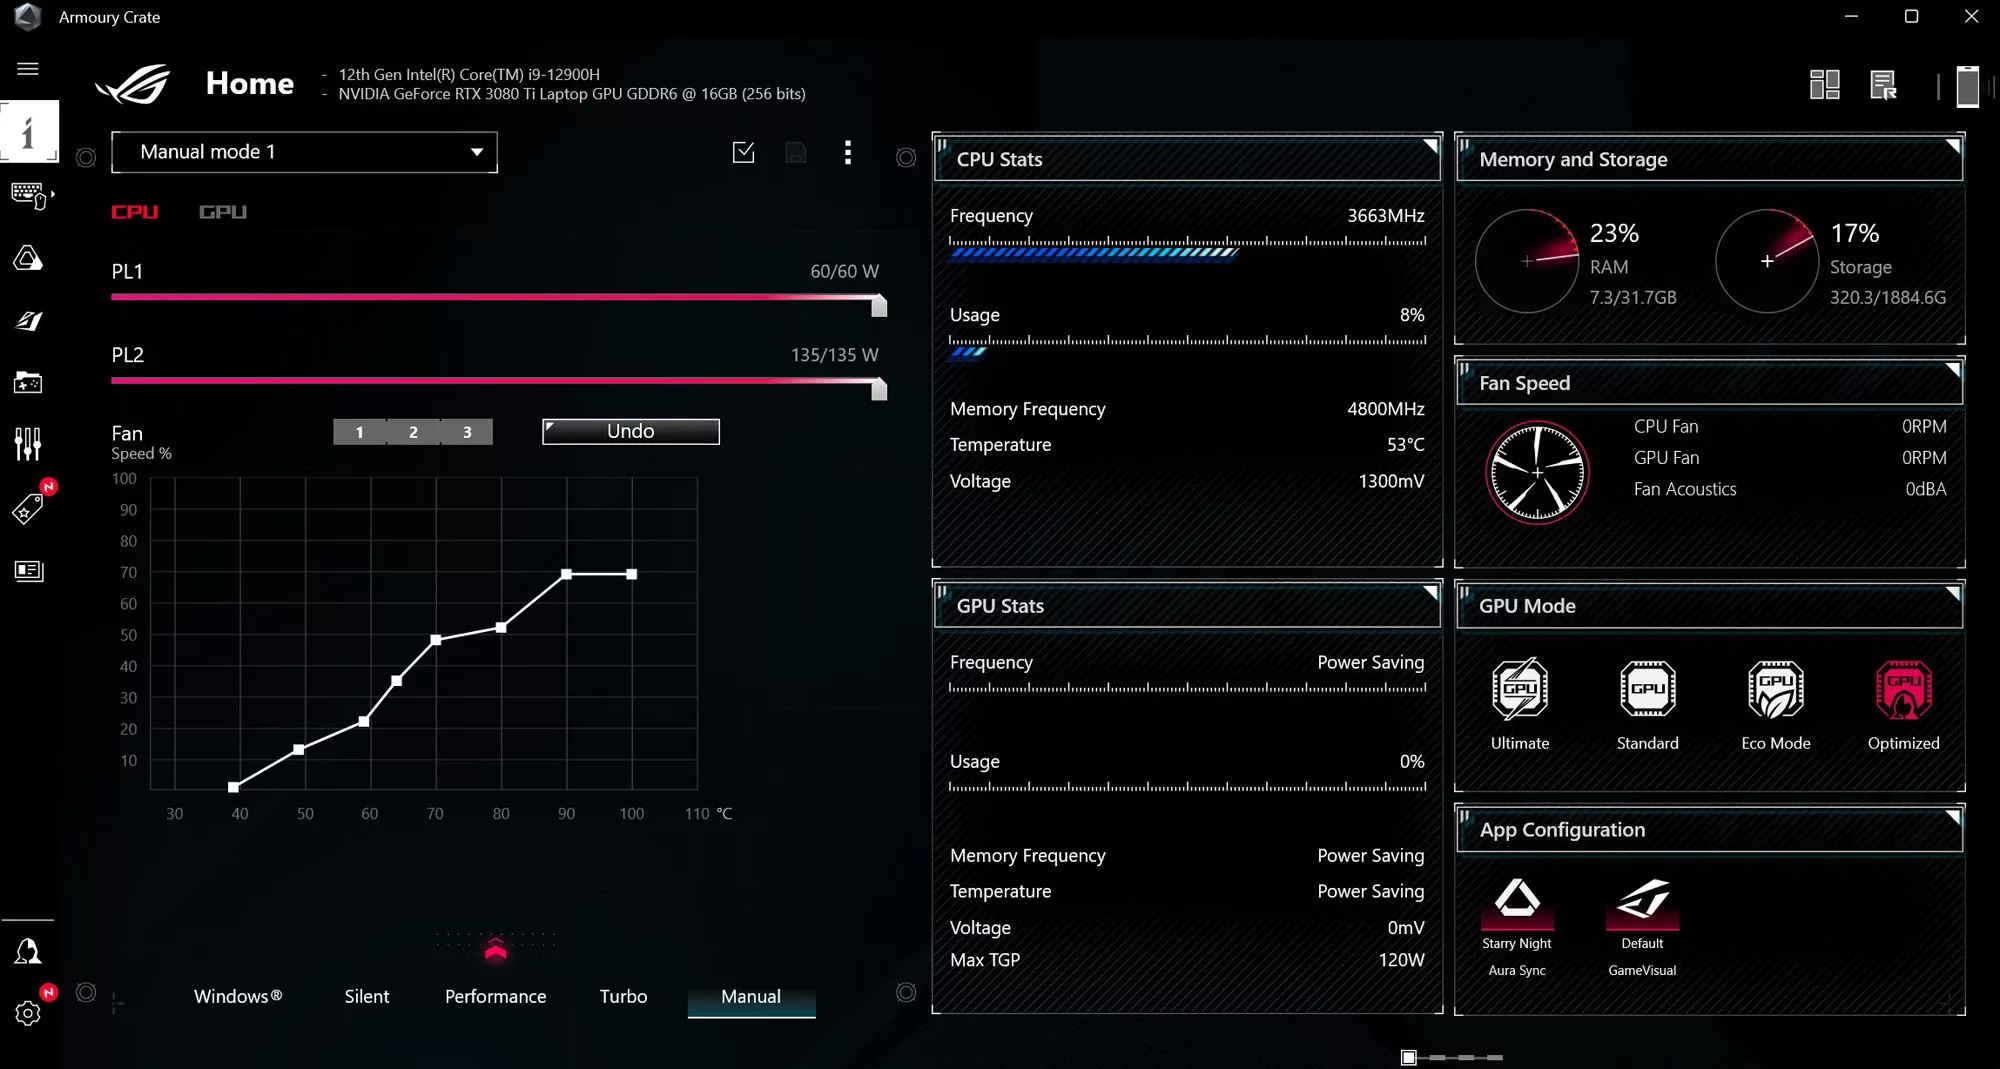 A screenshot of Armoury Crate's manual mode, showing CPU power sliders.